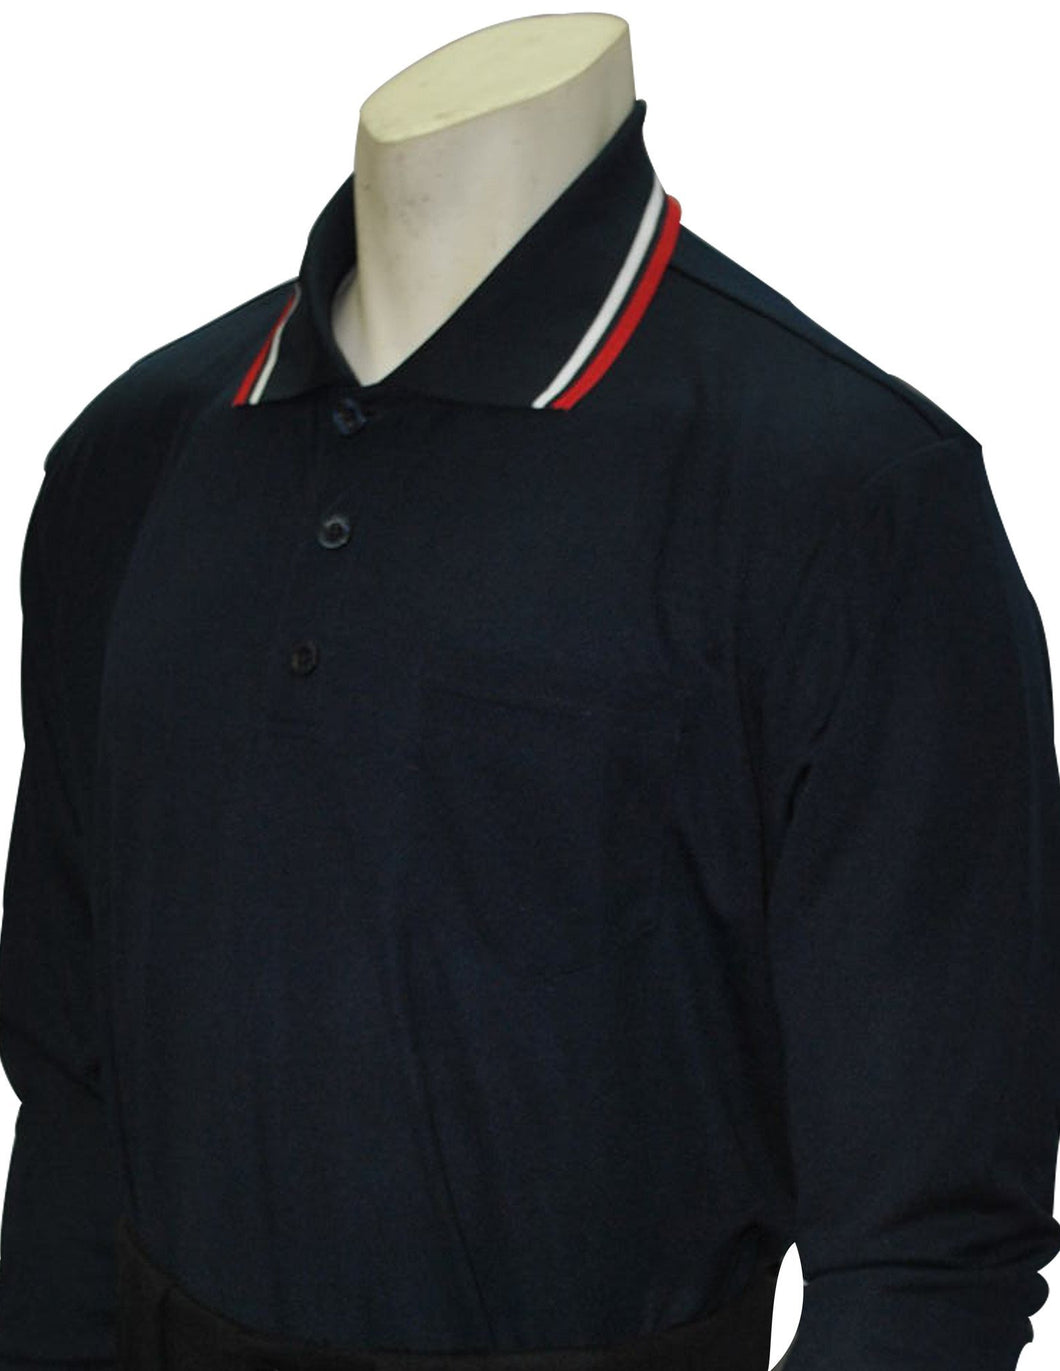 BBS301-Smitty Performance Mesh Umpire Long Sleeve Shirt - Available in Black, Navy and Powder Blue